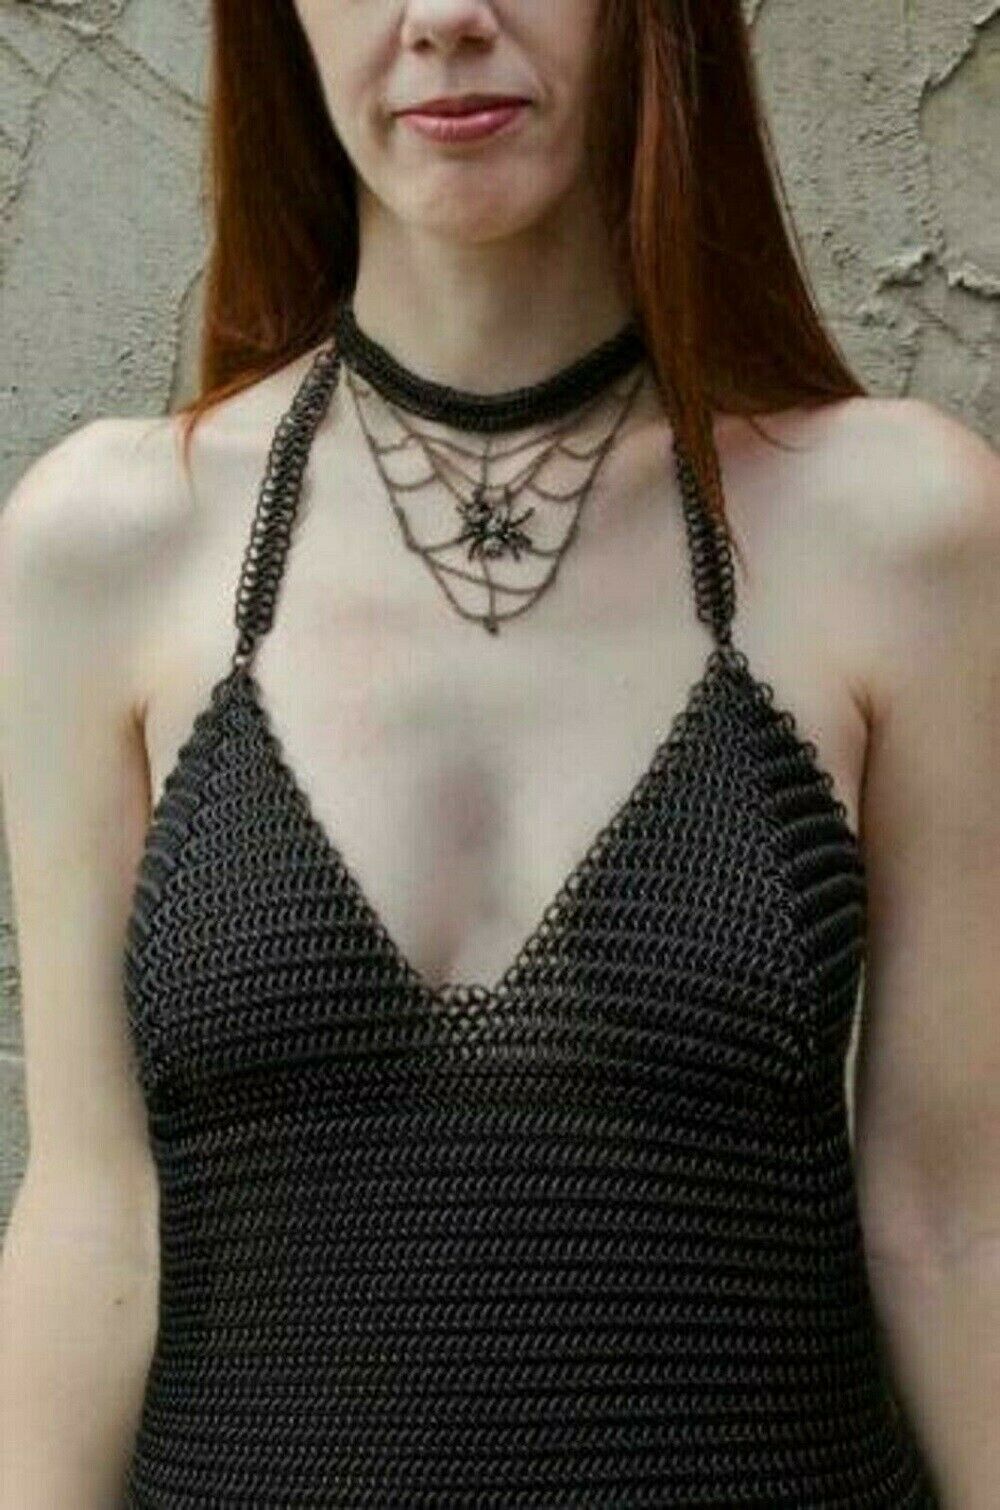 CHAIN MAIL HALTER BRA FOR WOMEN WEAR , MILD STEEL BUTTED CHAIN MAIL BUTTED RINGS